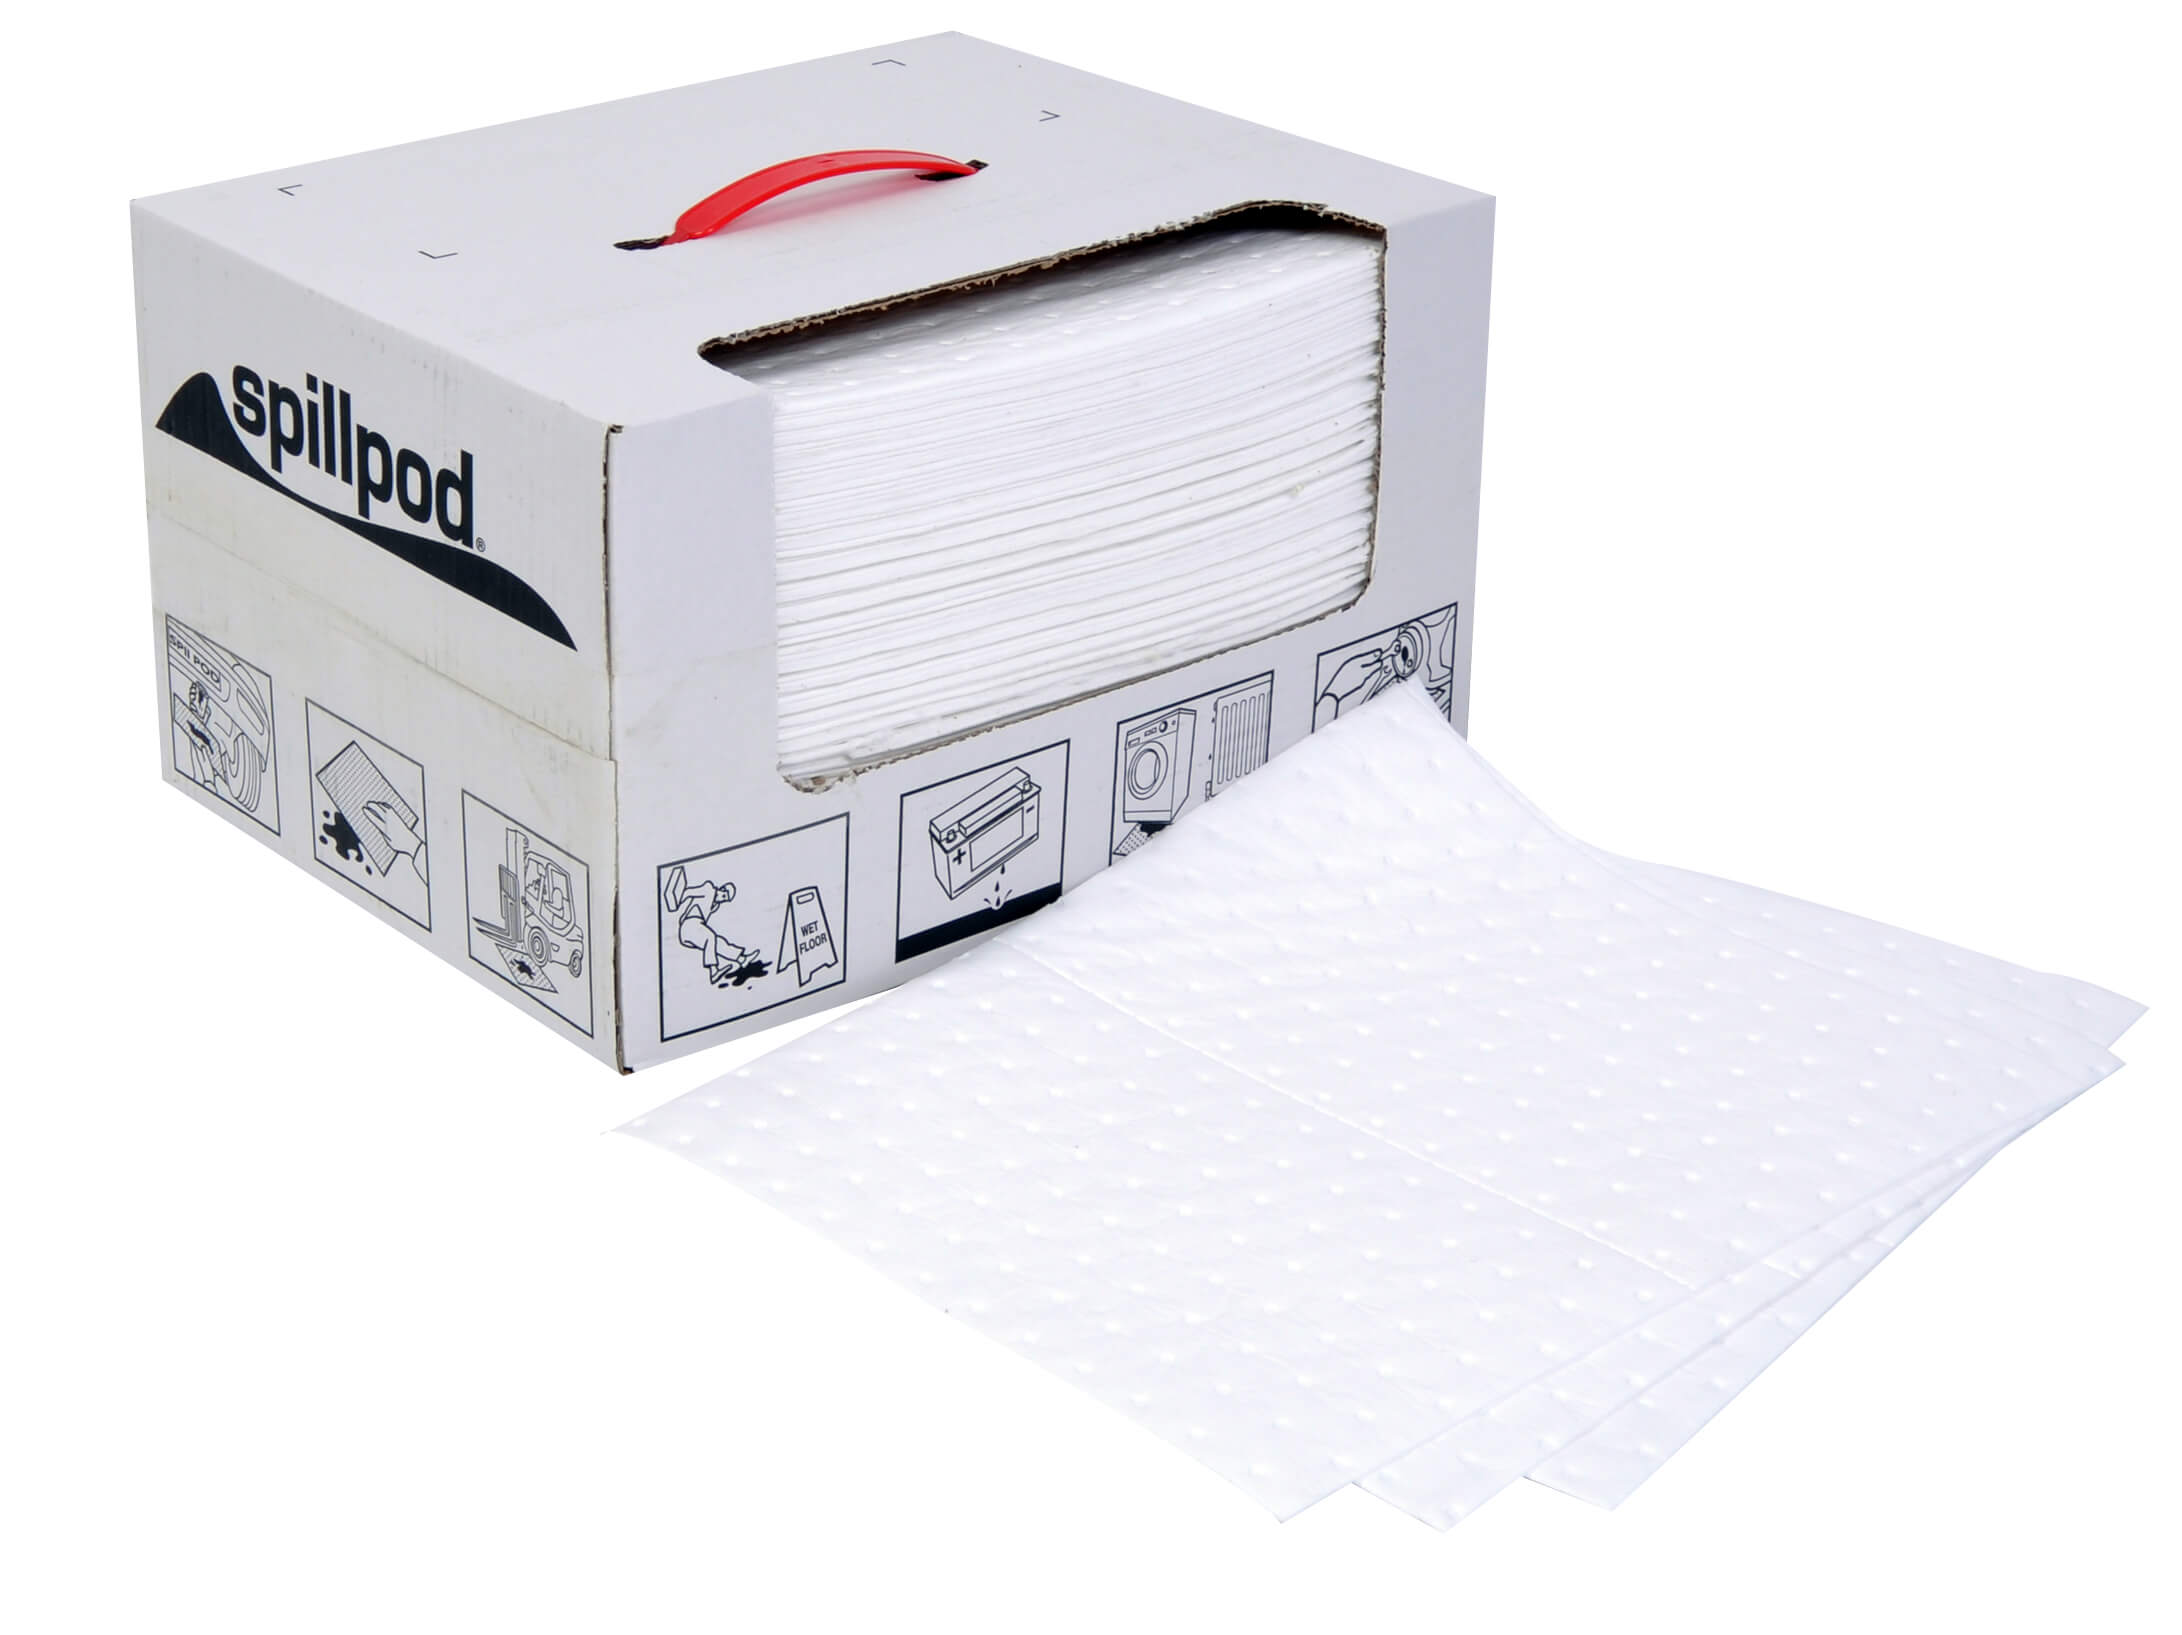 75 Oil & Fuel absorbent pads - Dispensing Box 